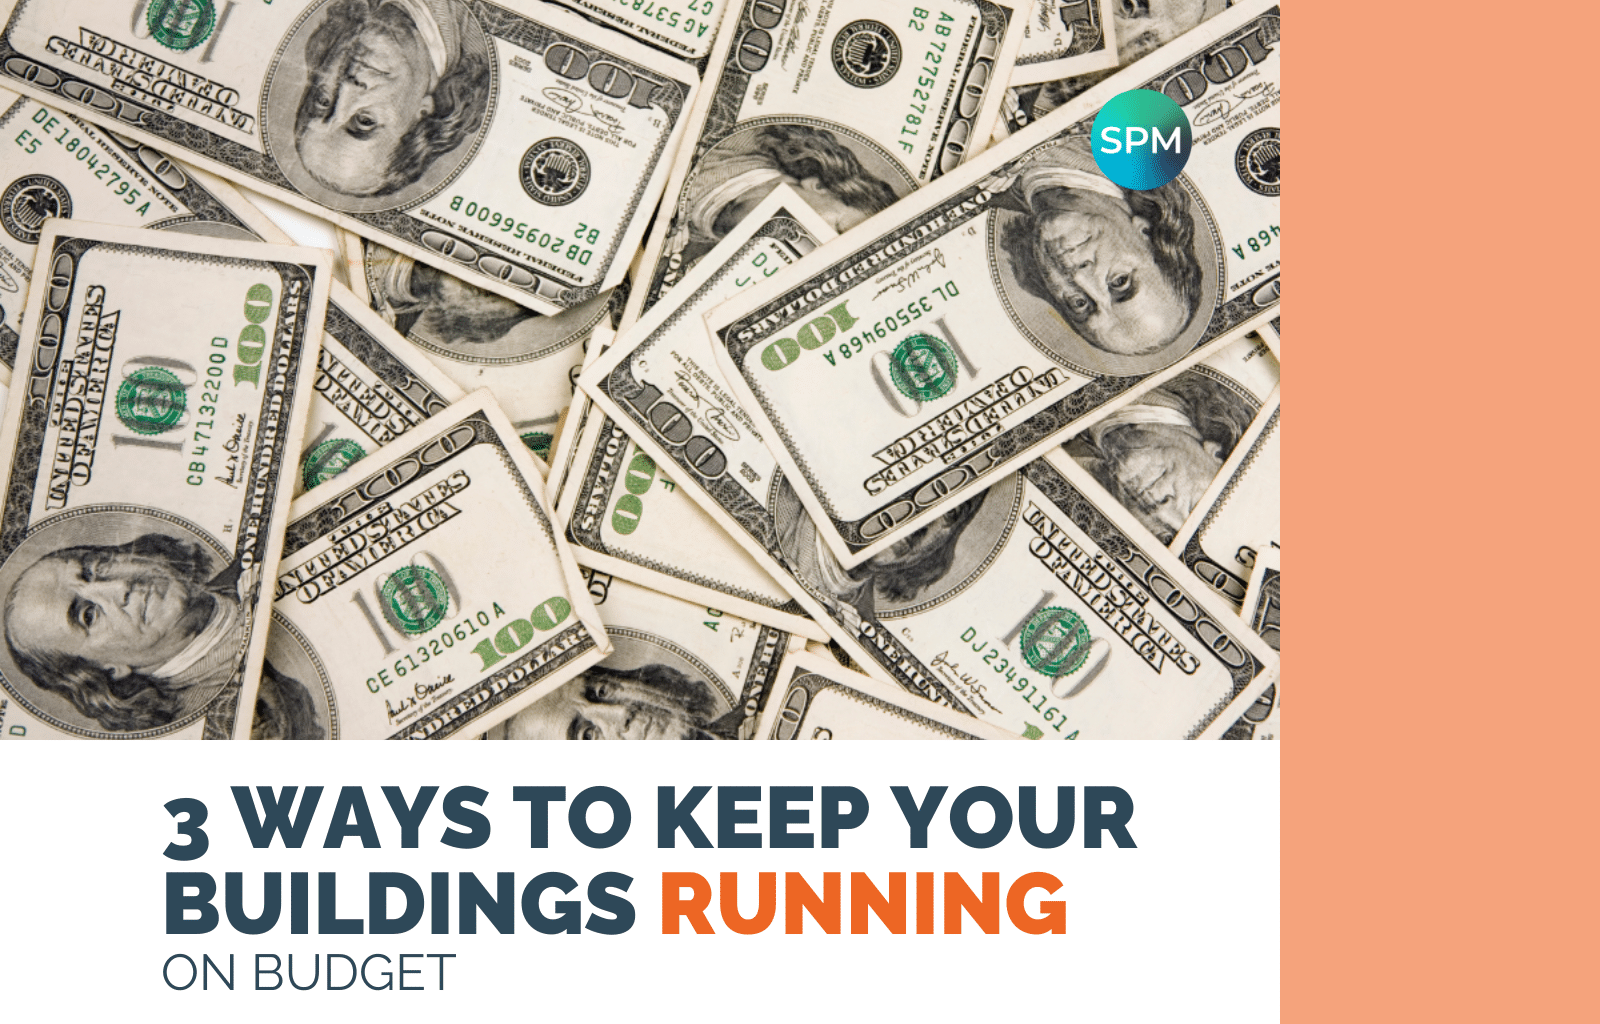 3 Ways to Keep Your Buildings Running on Budget